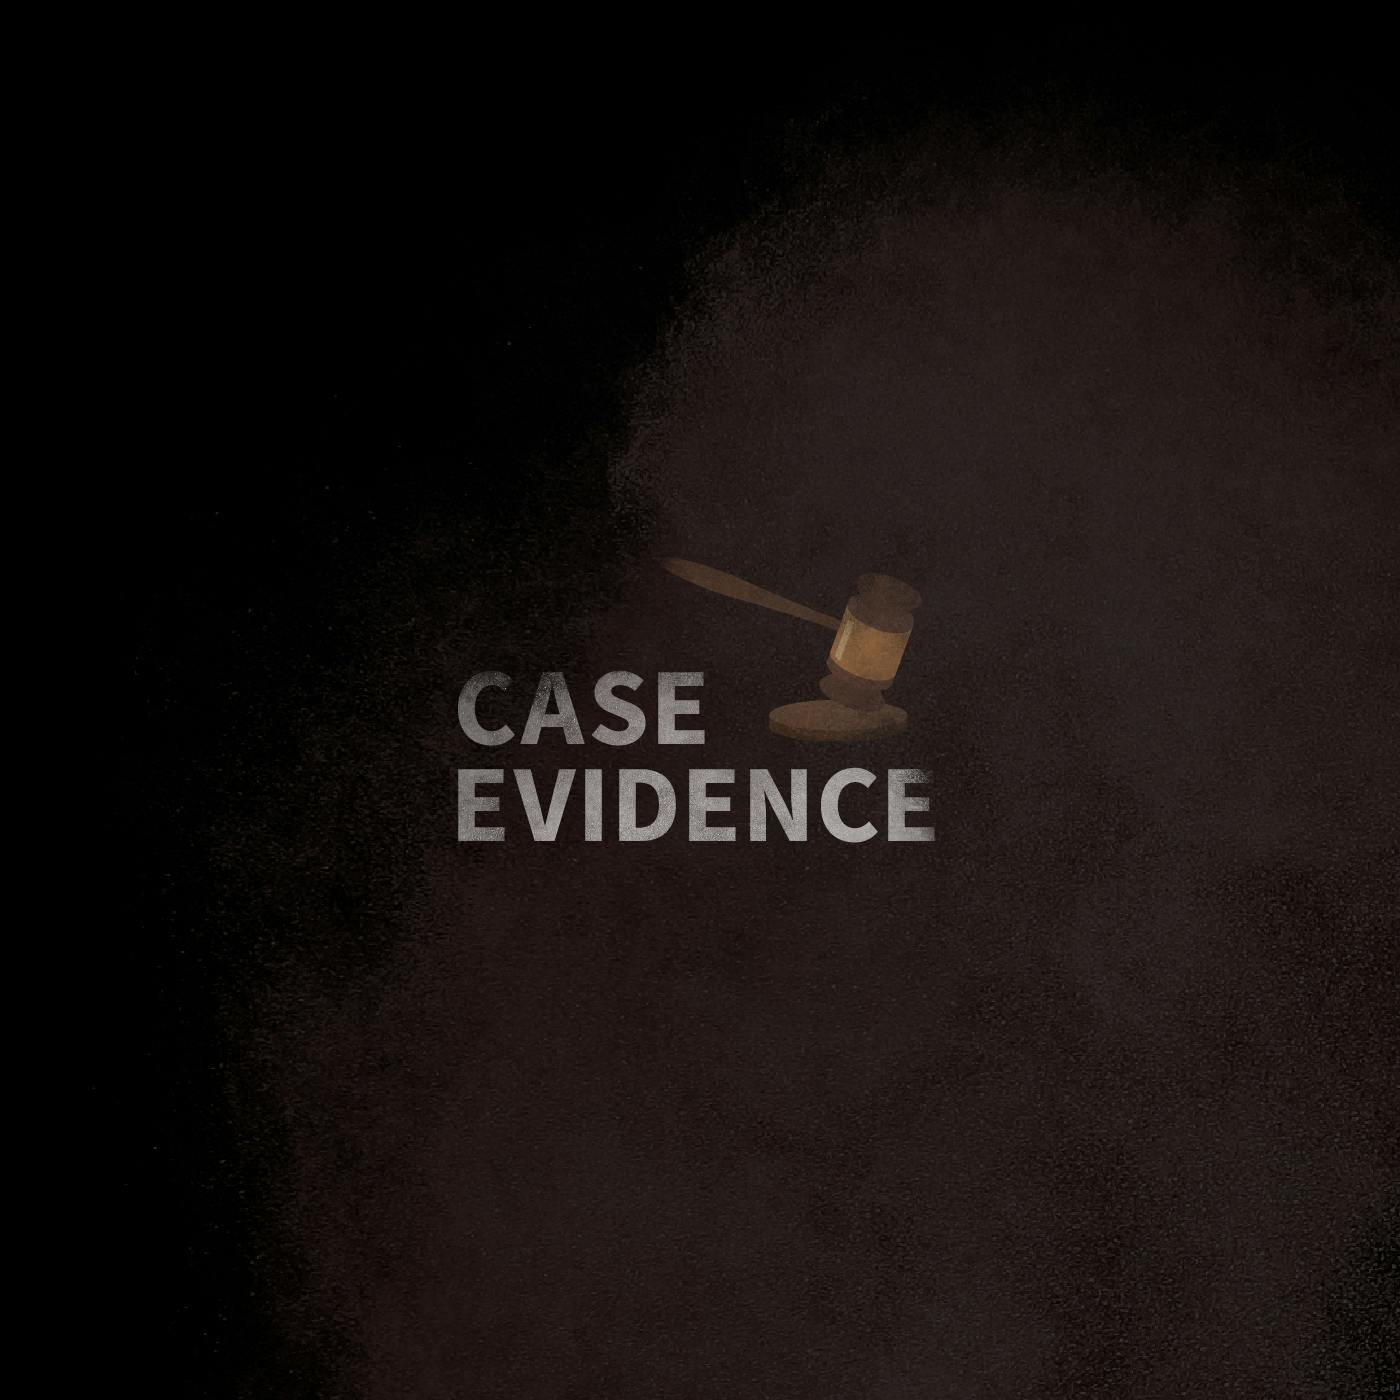 Case Evidence 07.10.17 by Tenderfoot TV